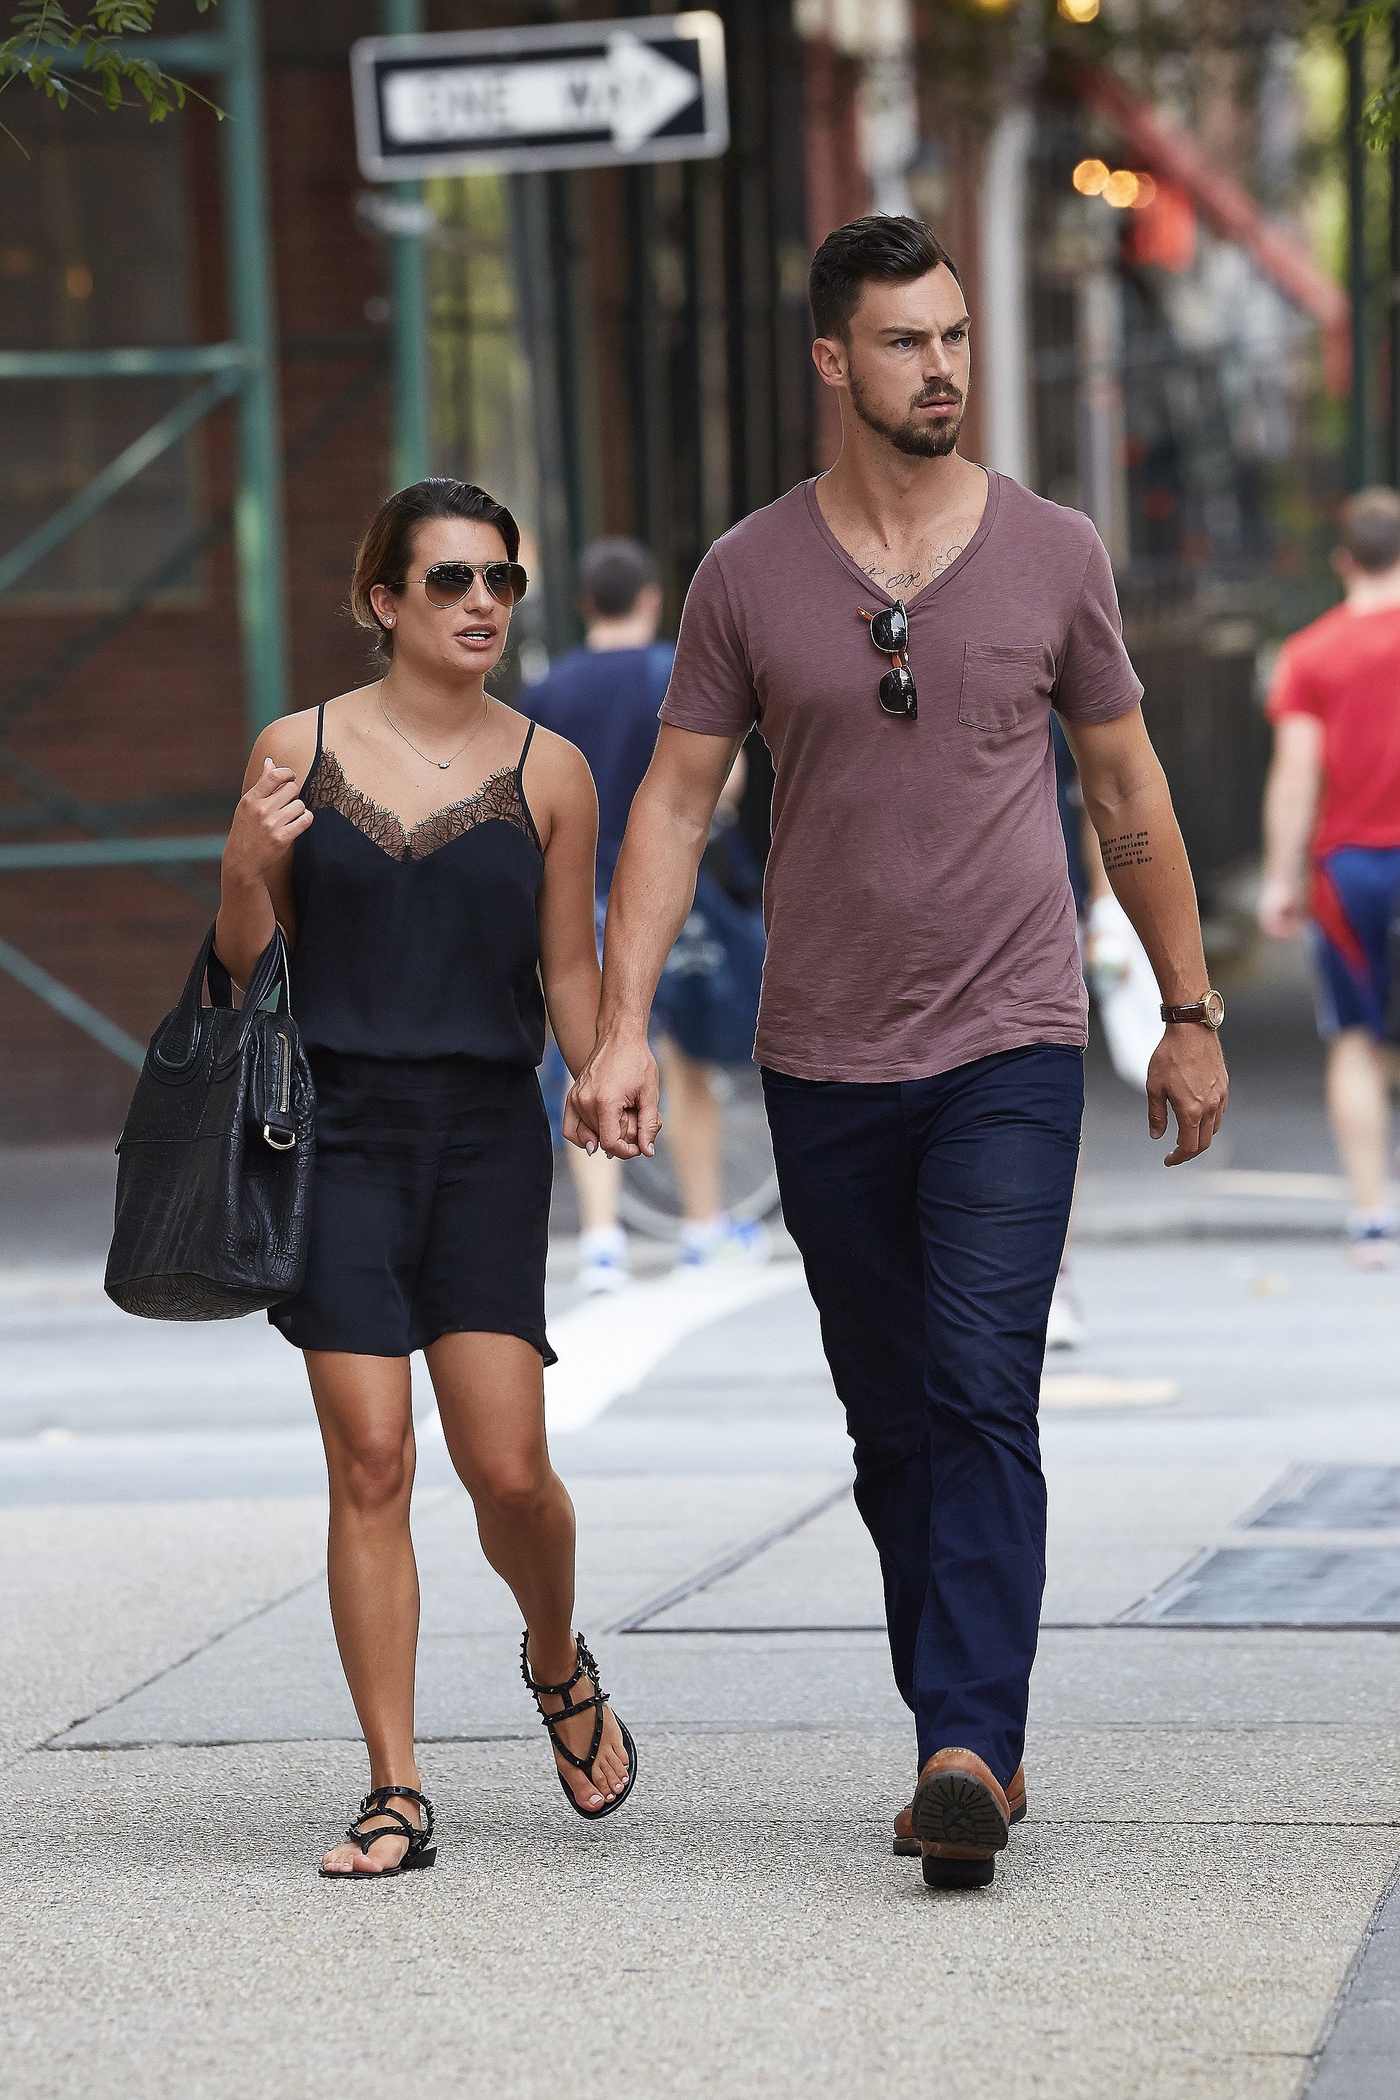 Lea Michele in New York with her Boyfriend submitted by Canary + Rook